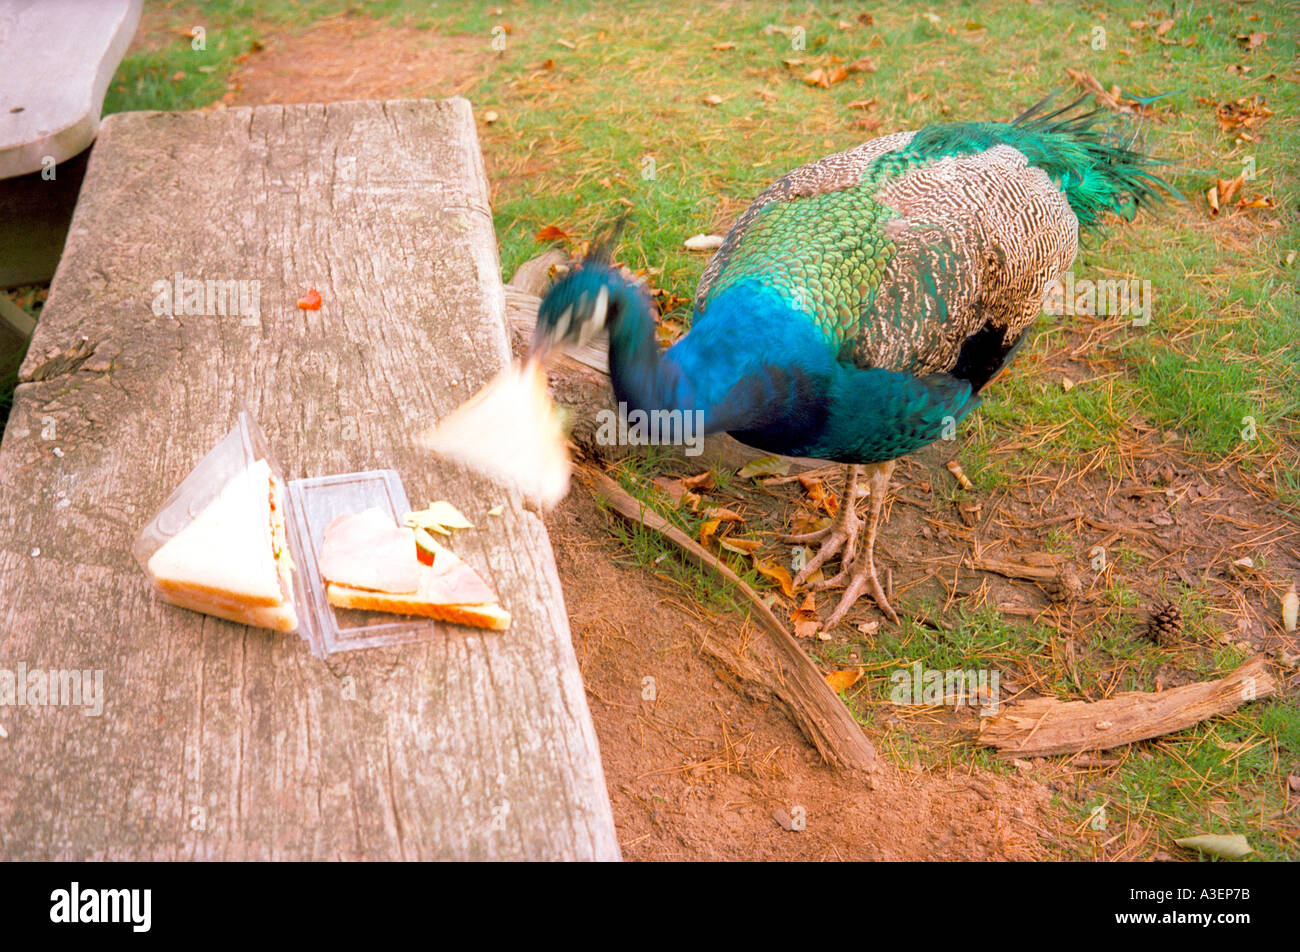 A peacock snatches a sandwich. Stock Photo